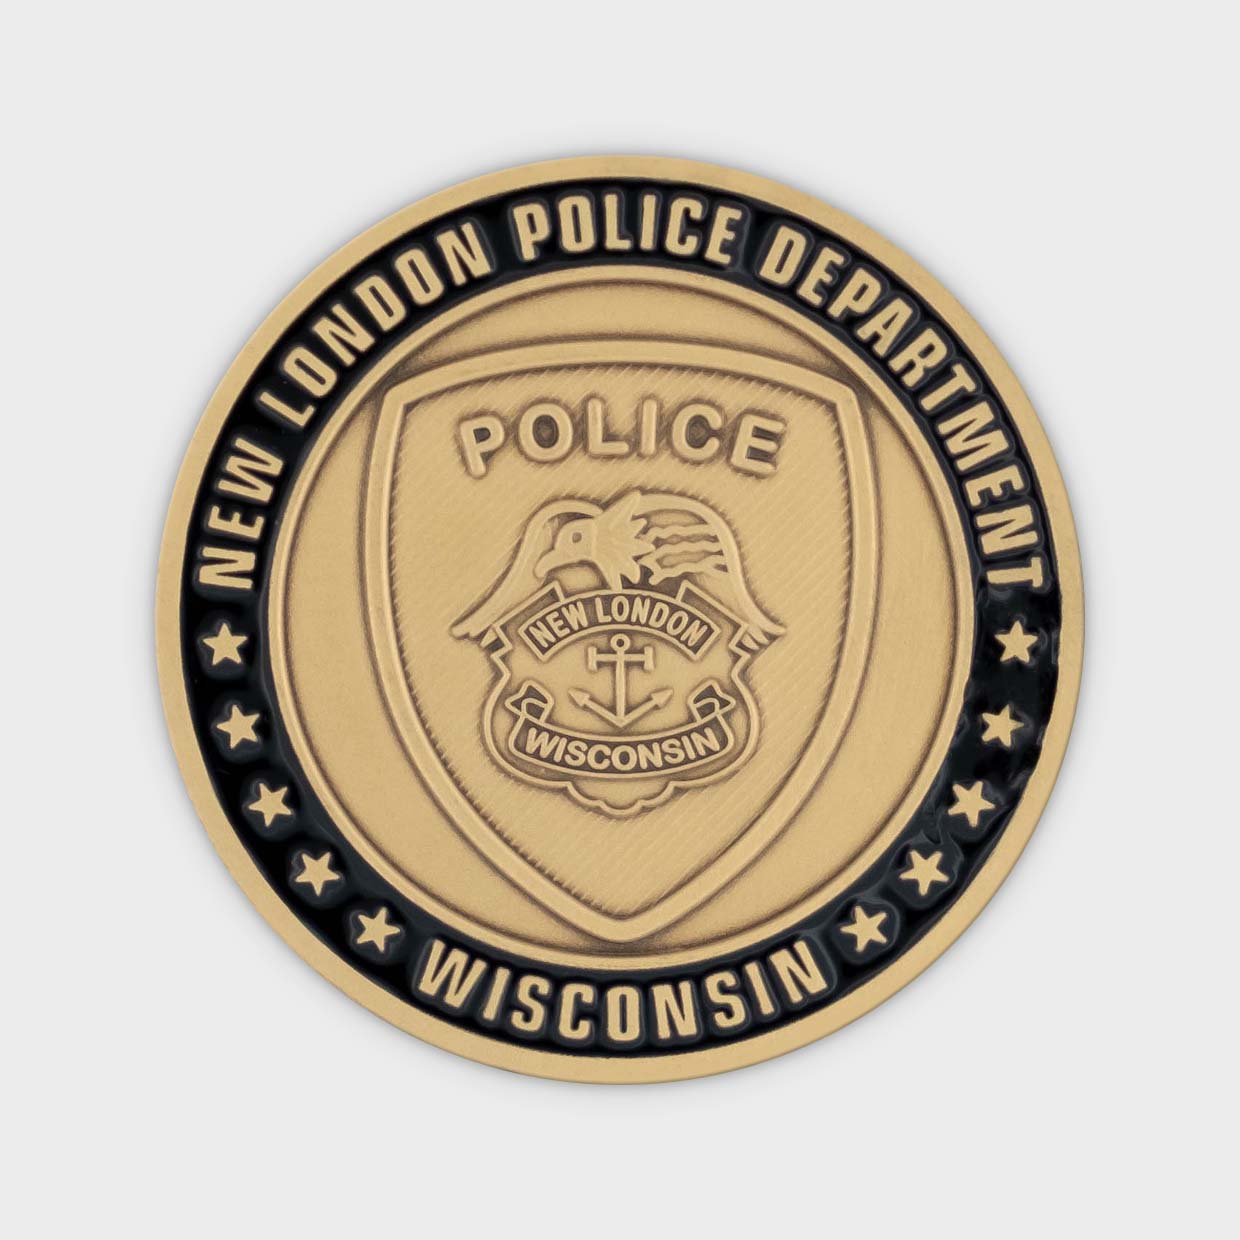 New London Police Department Coin Obverse